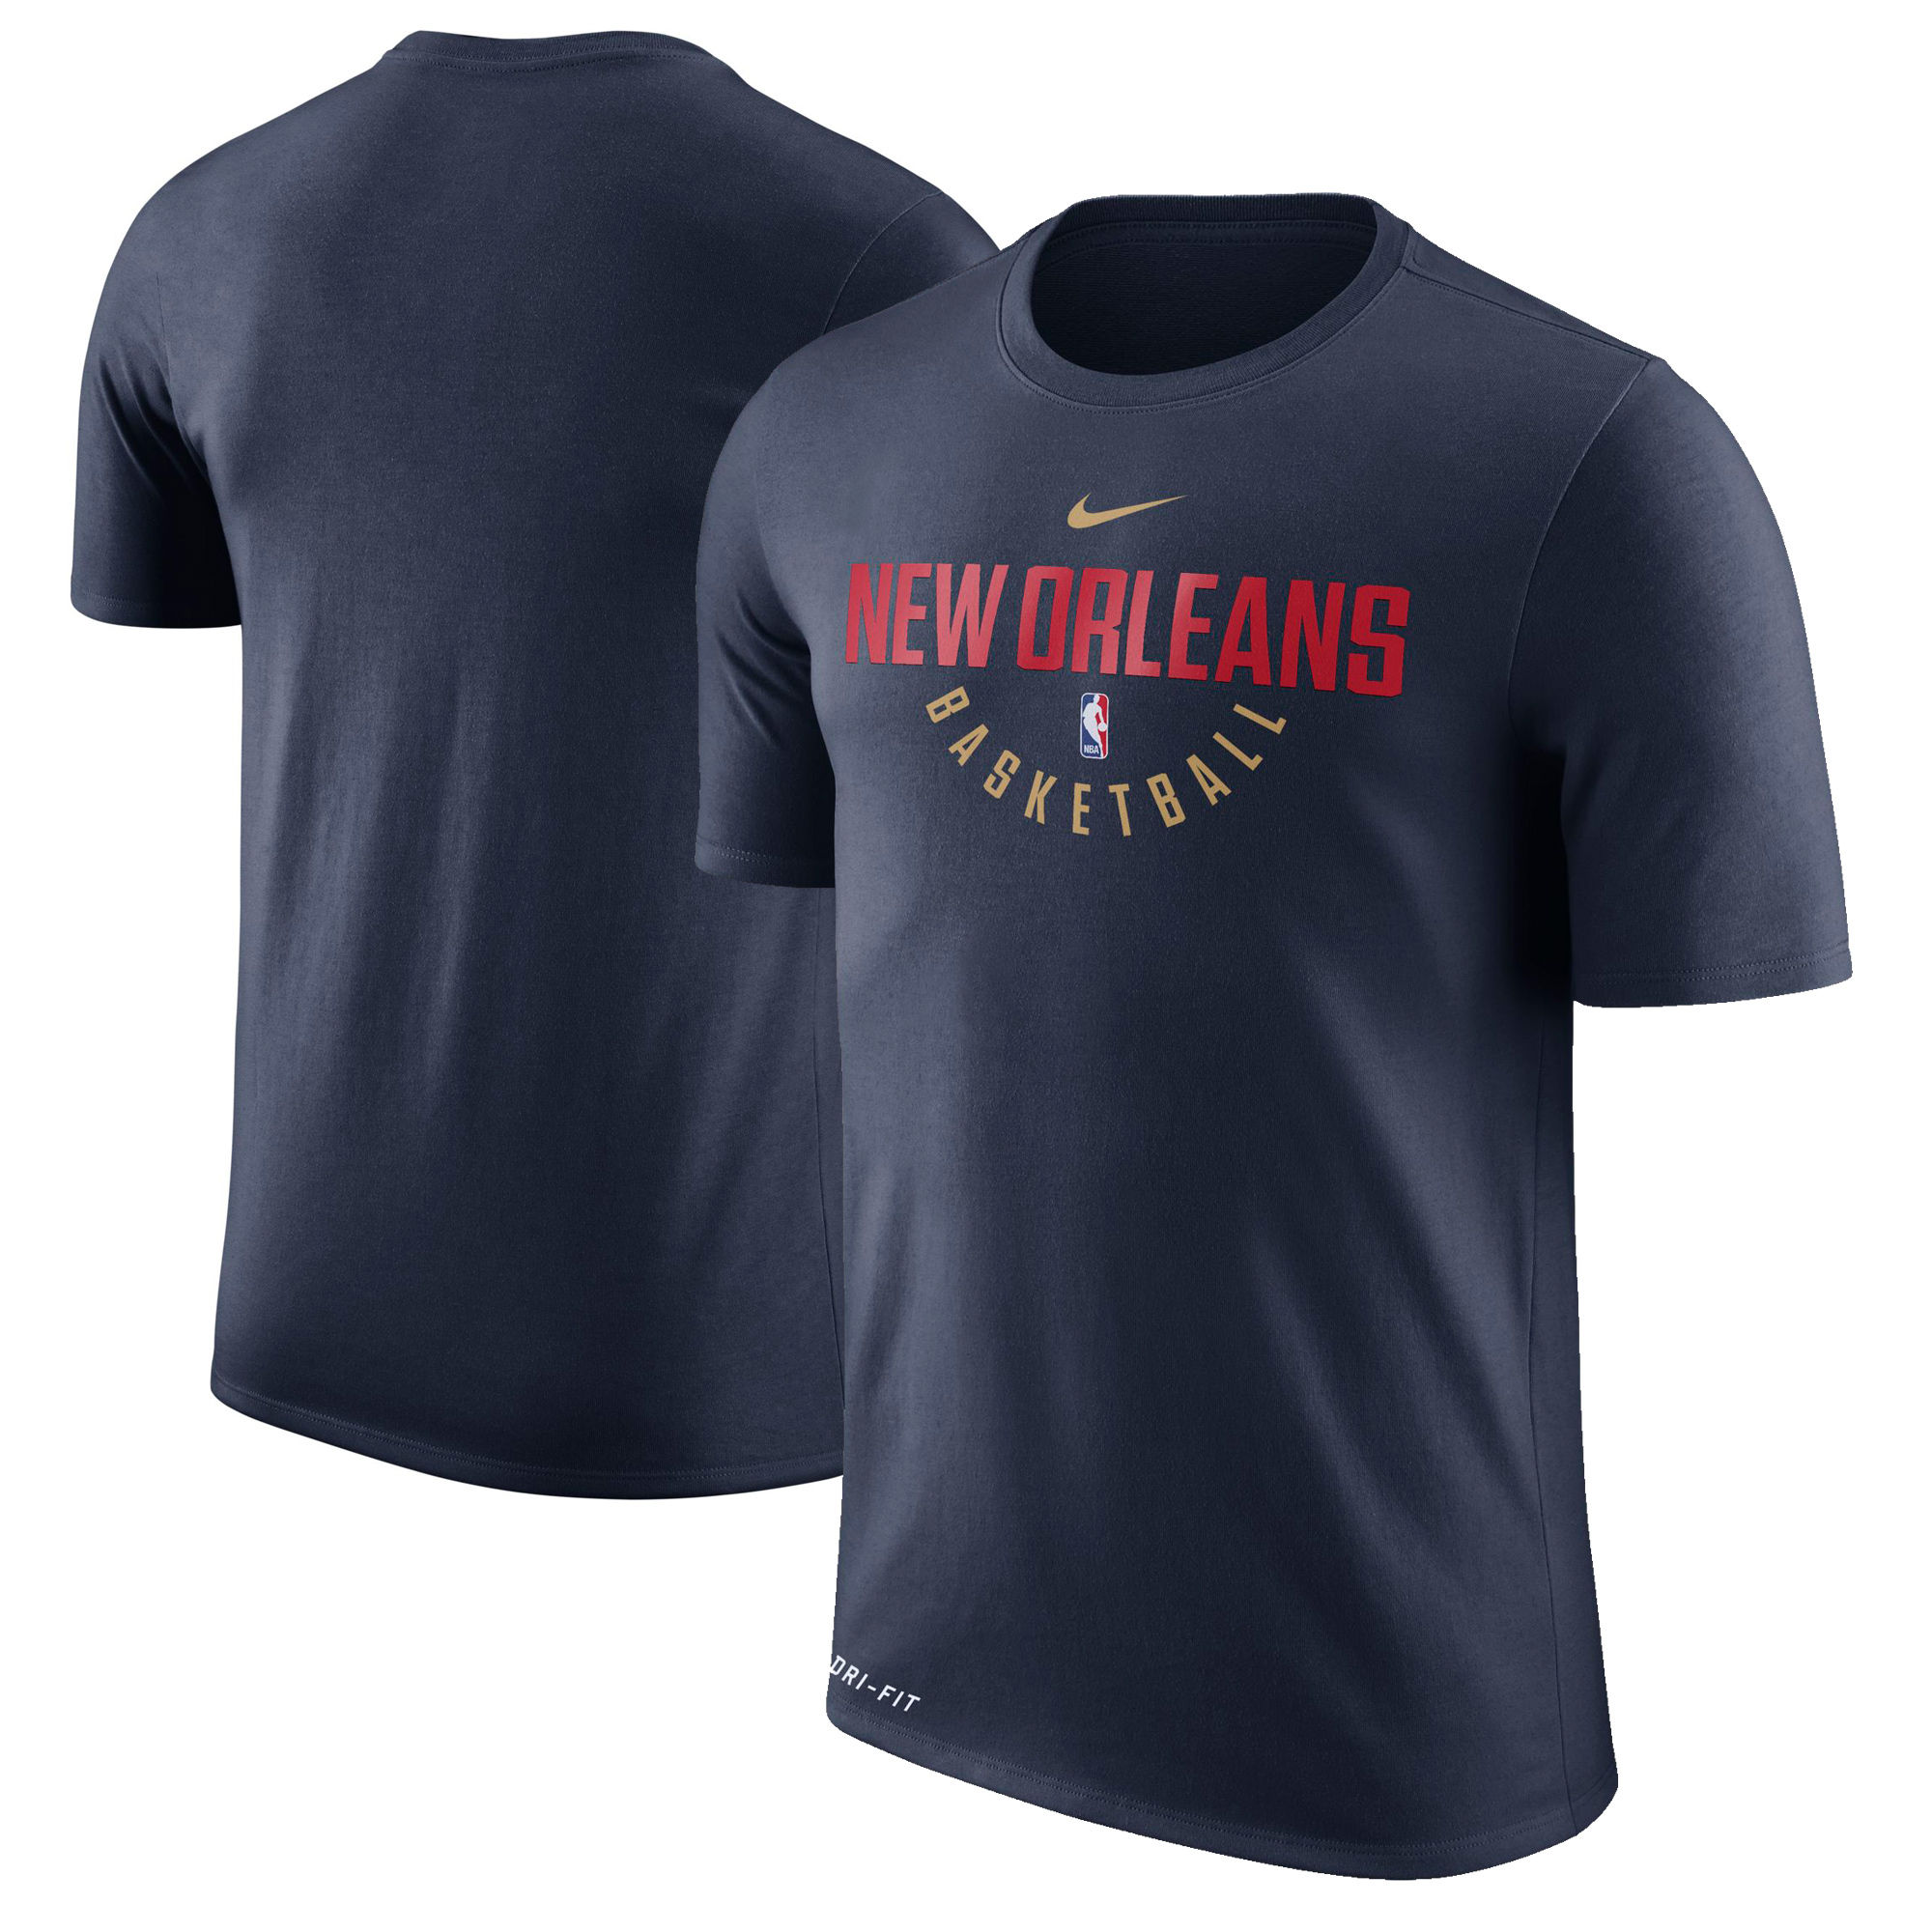 New Orleans Pelicans Navy Nike Practice Performance T-Shirt